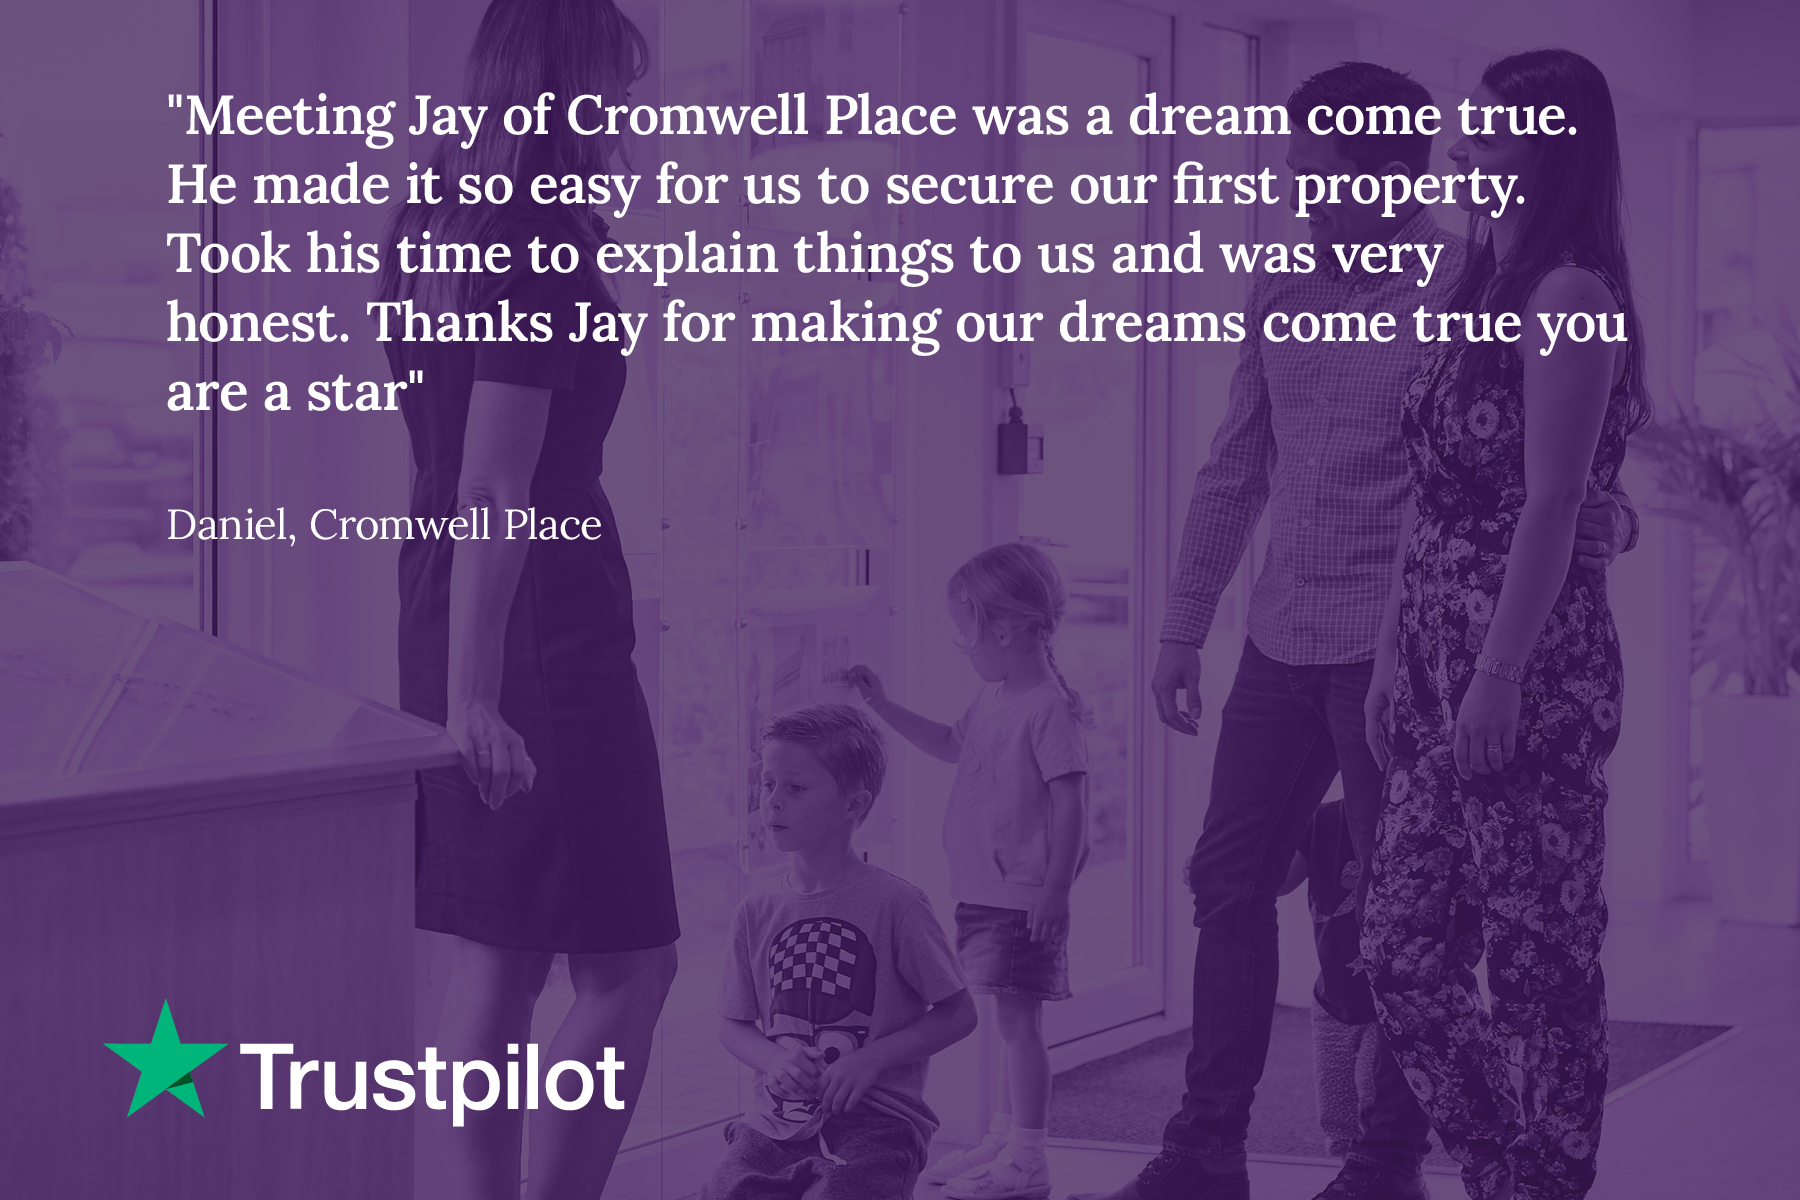 Cromwell Tustpilot review